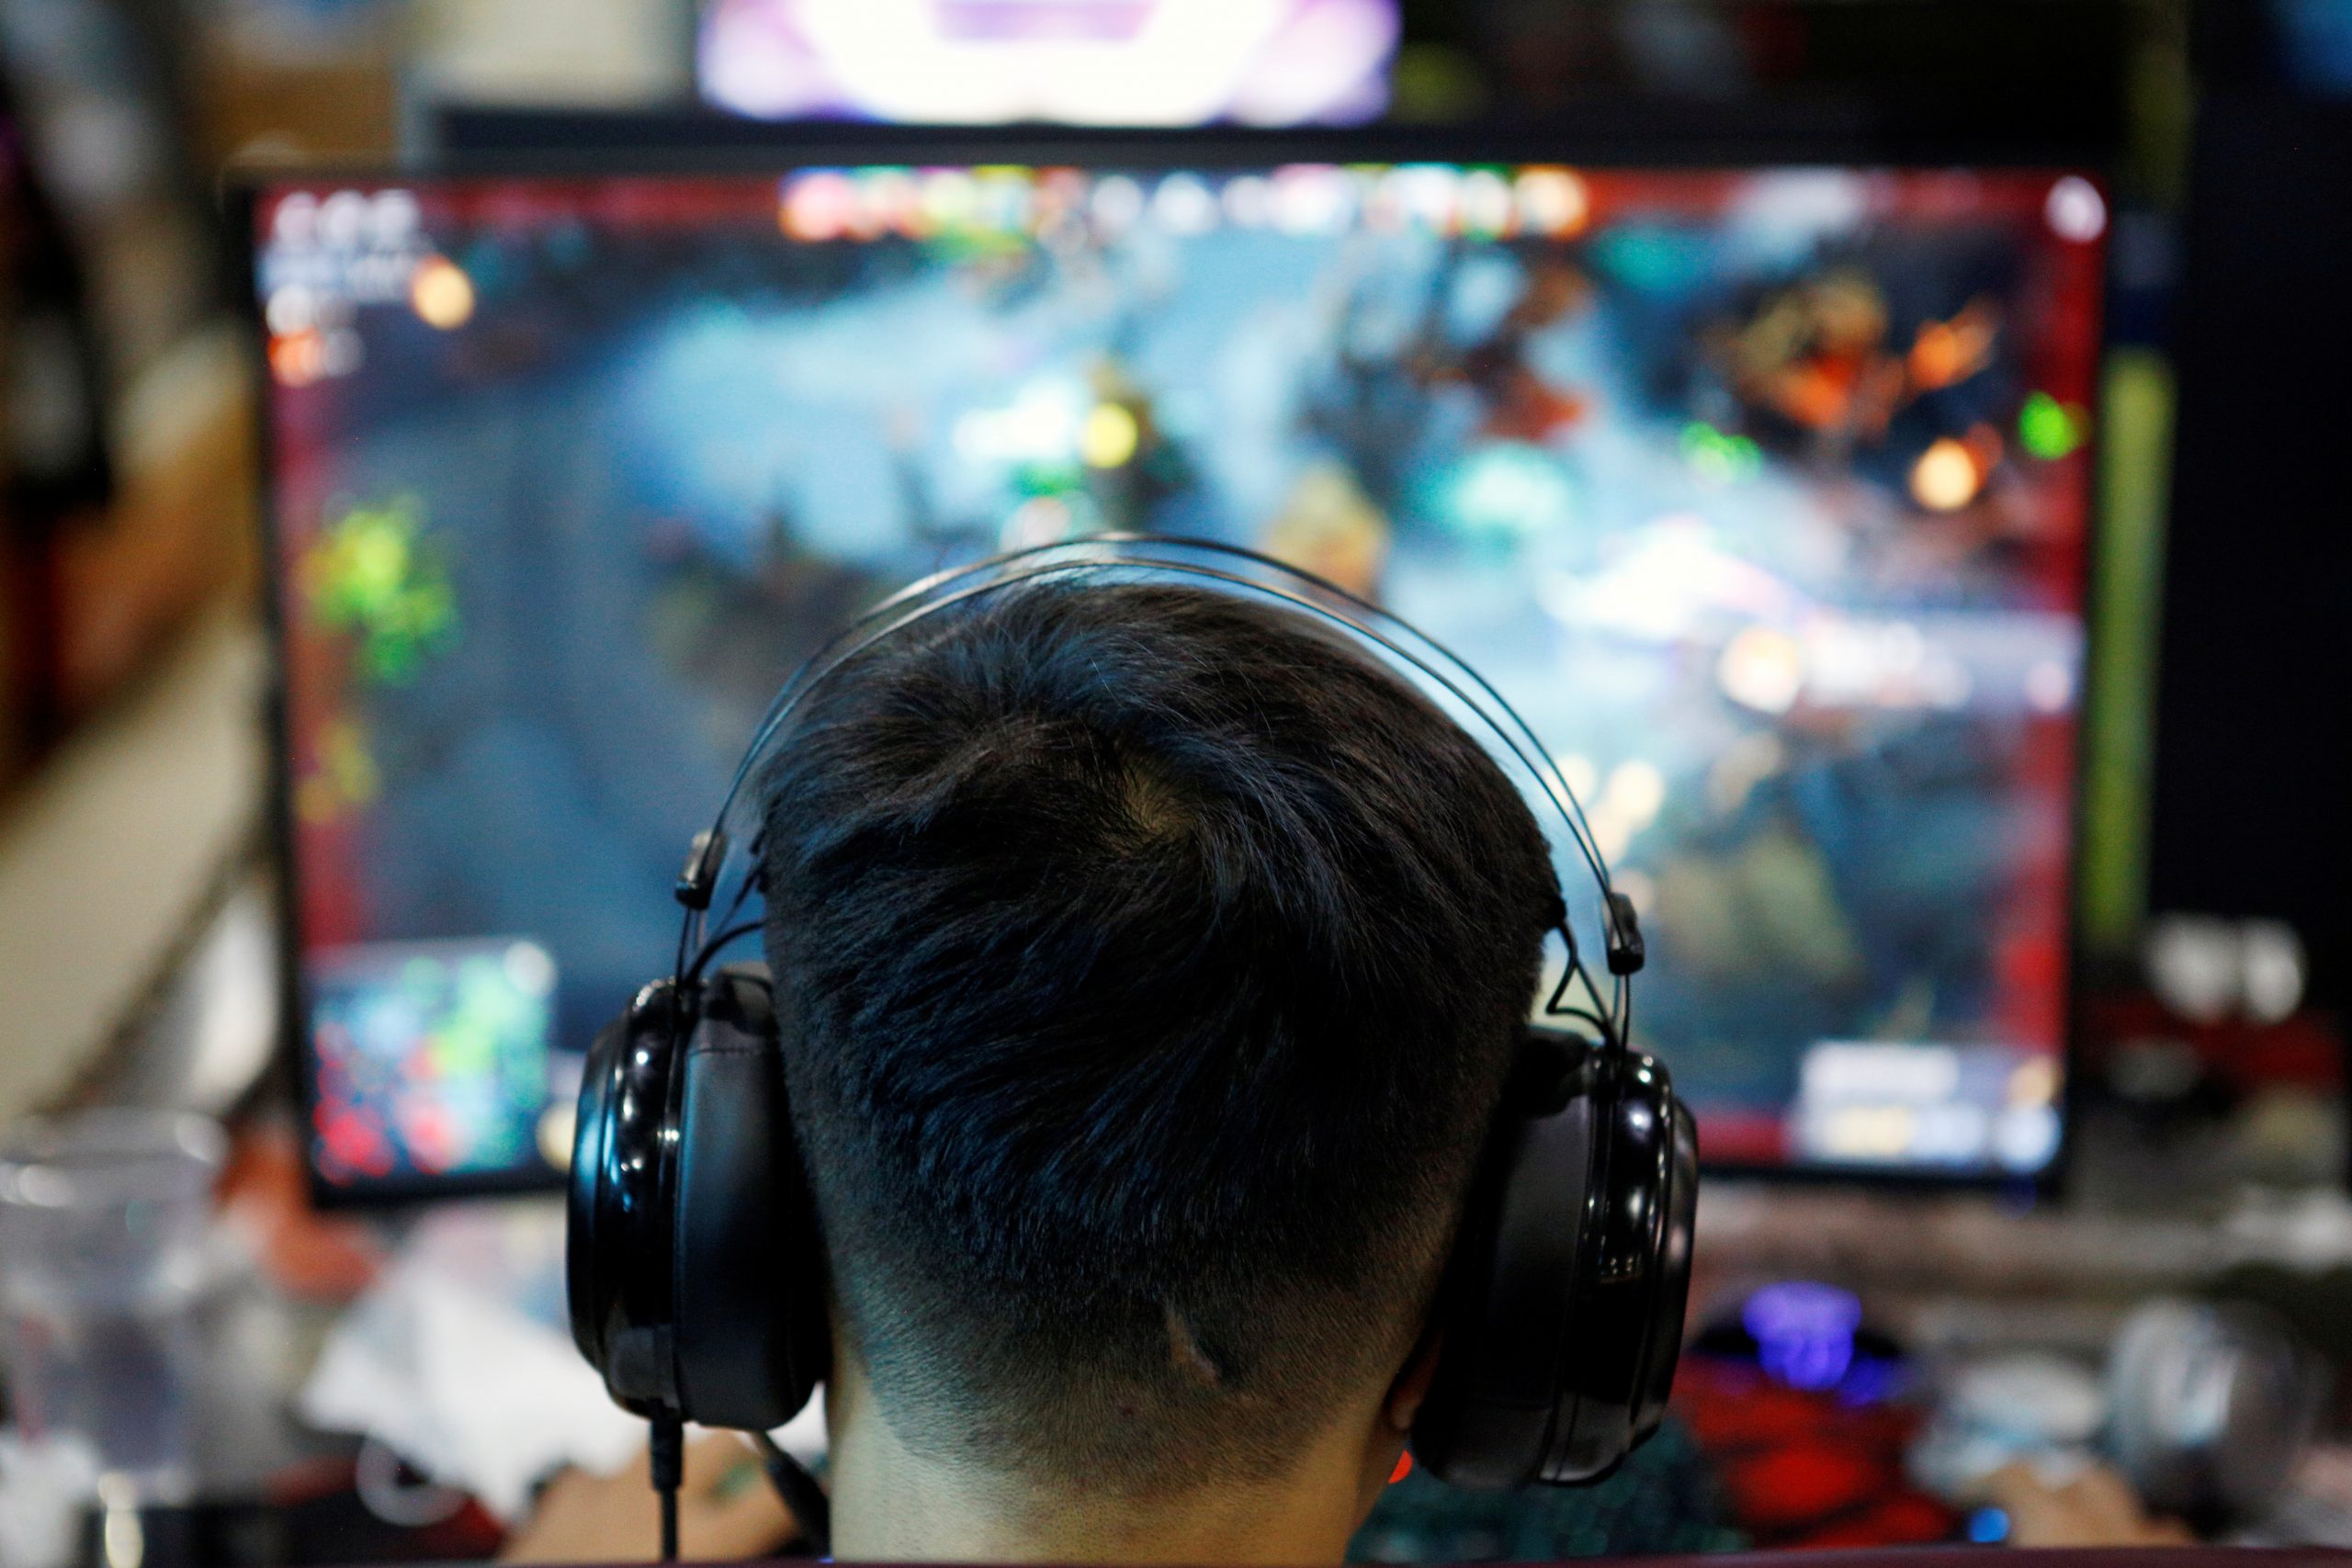  Explainer: Why and how China is drastically limiting online gaming for under 18s